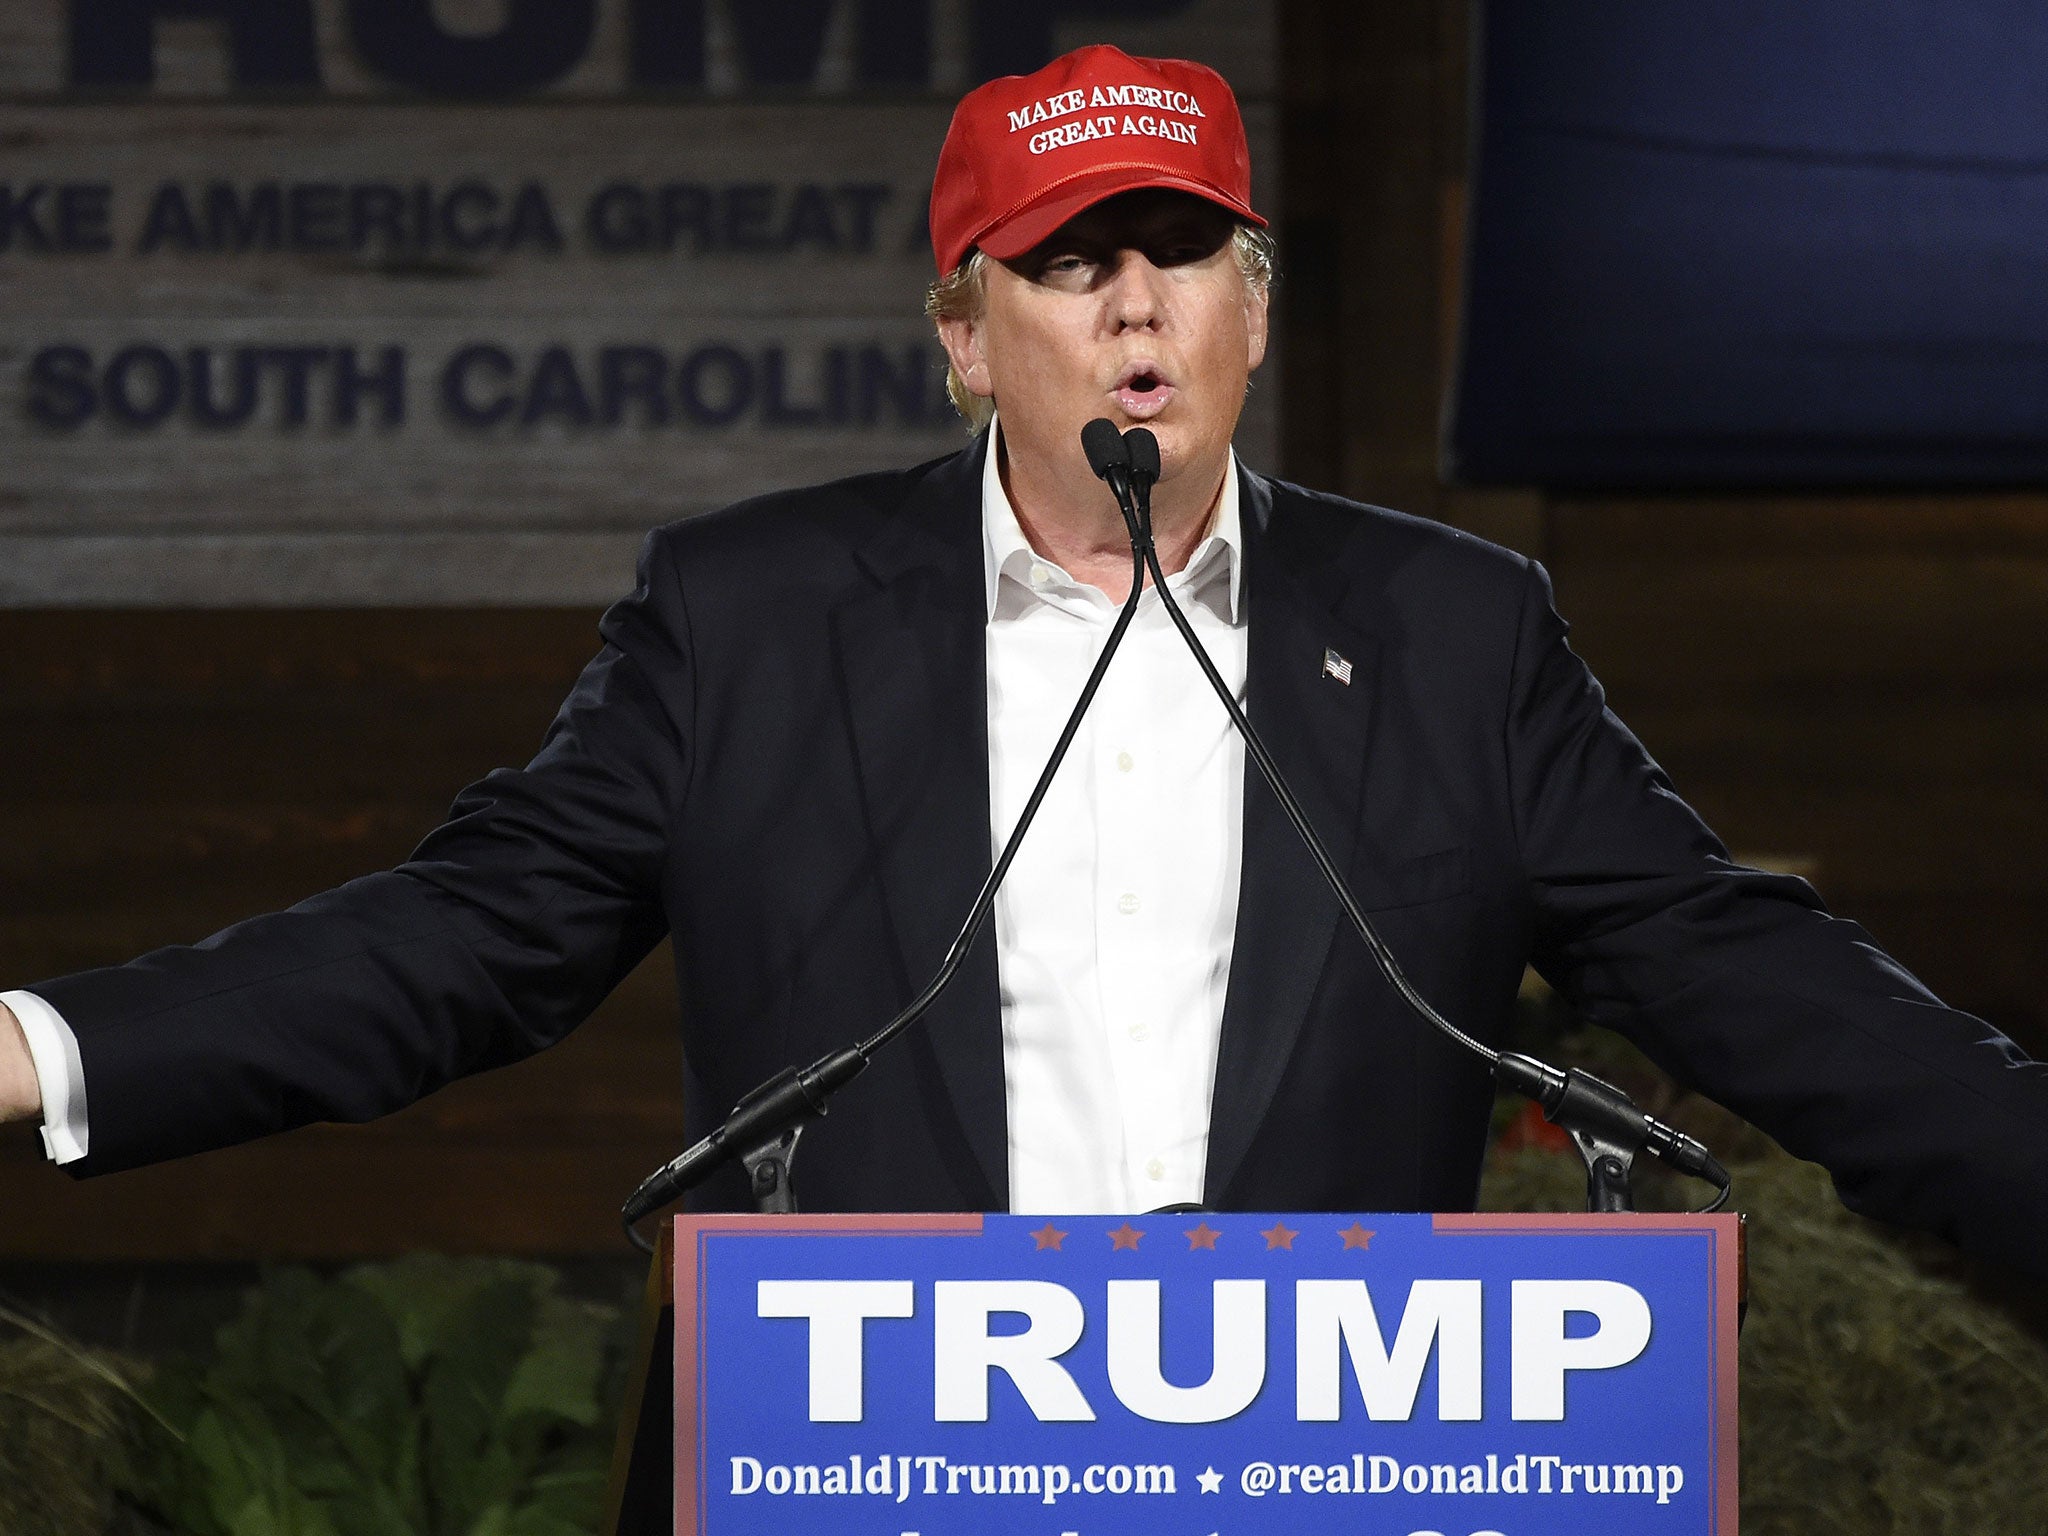 Donald Trump will not be taking part in Thursday's GOP debate